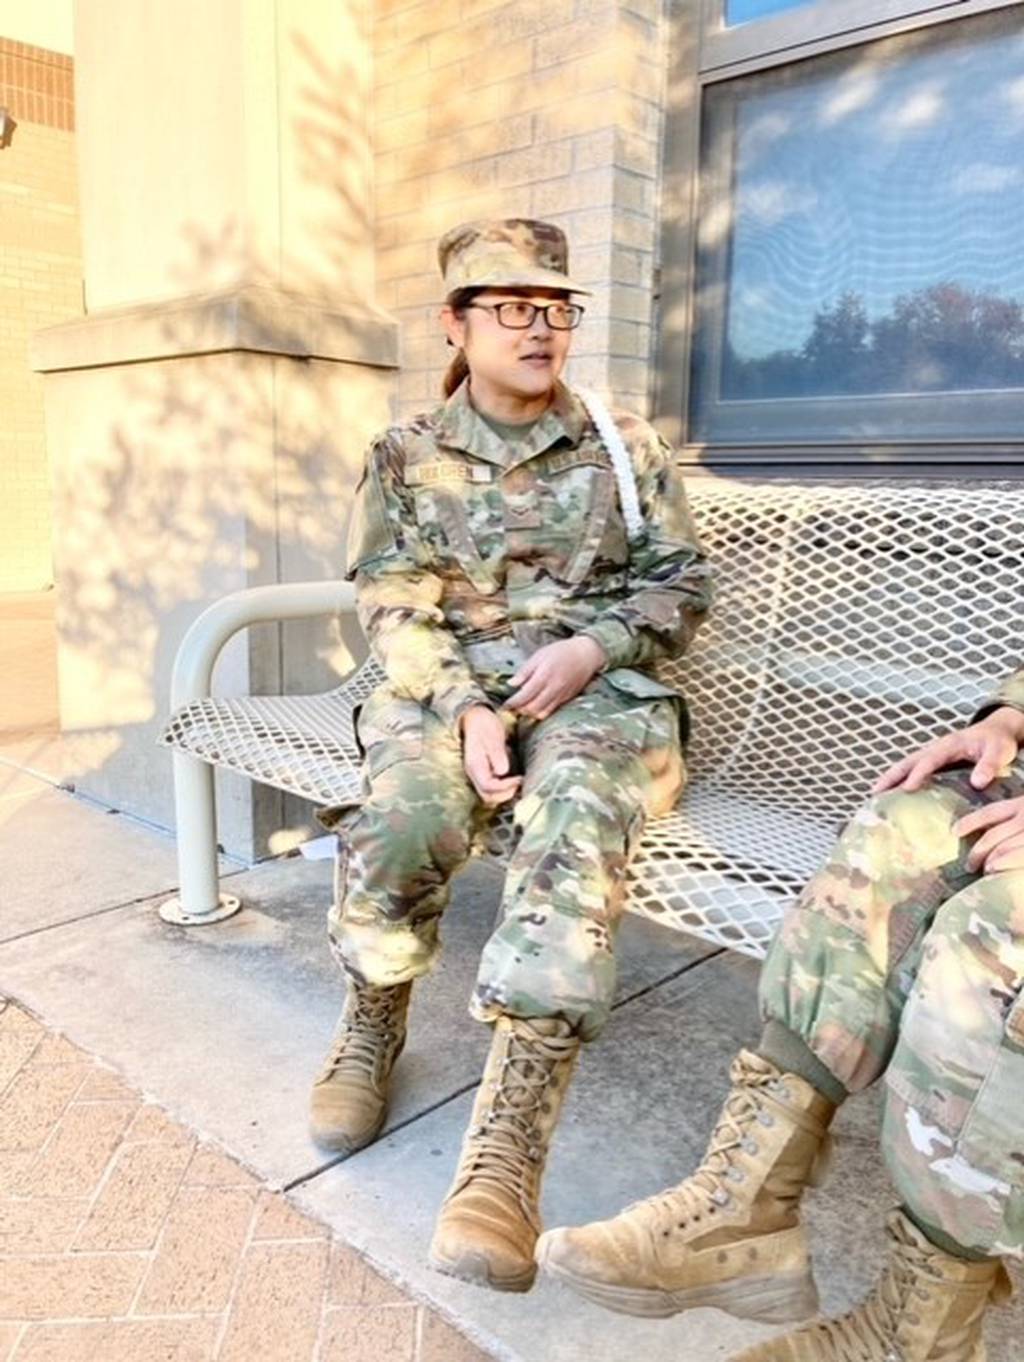 Meet the Special Forces task force featured on the Army uniforms